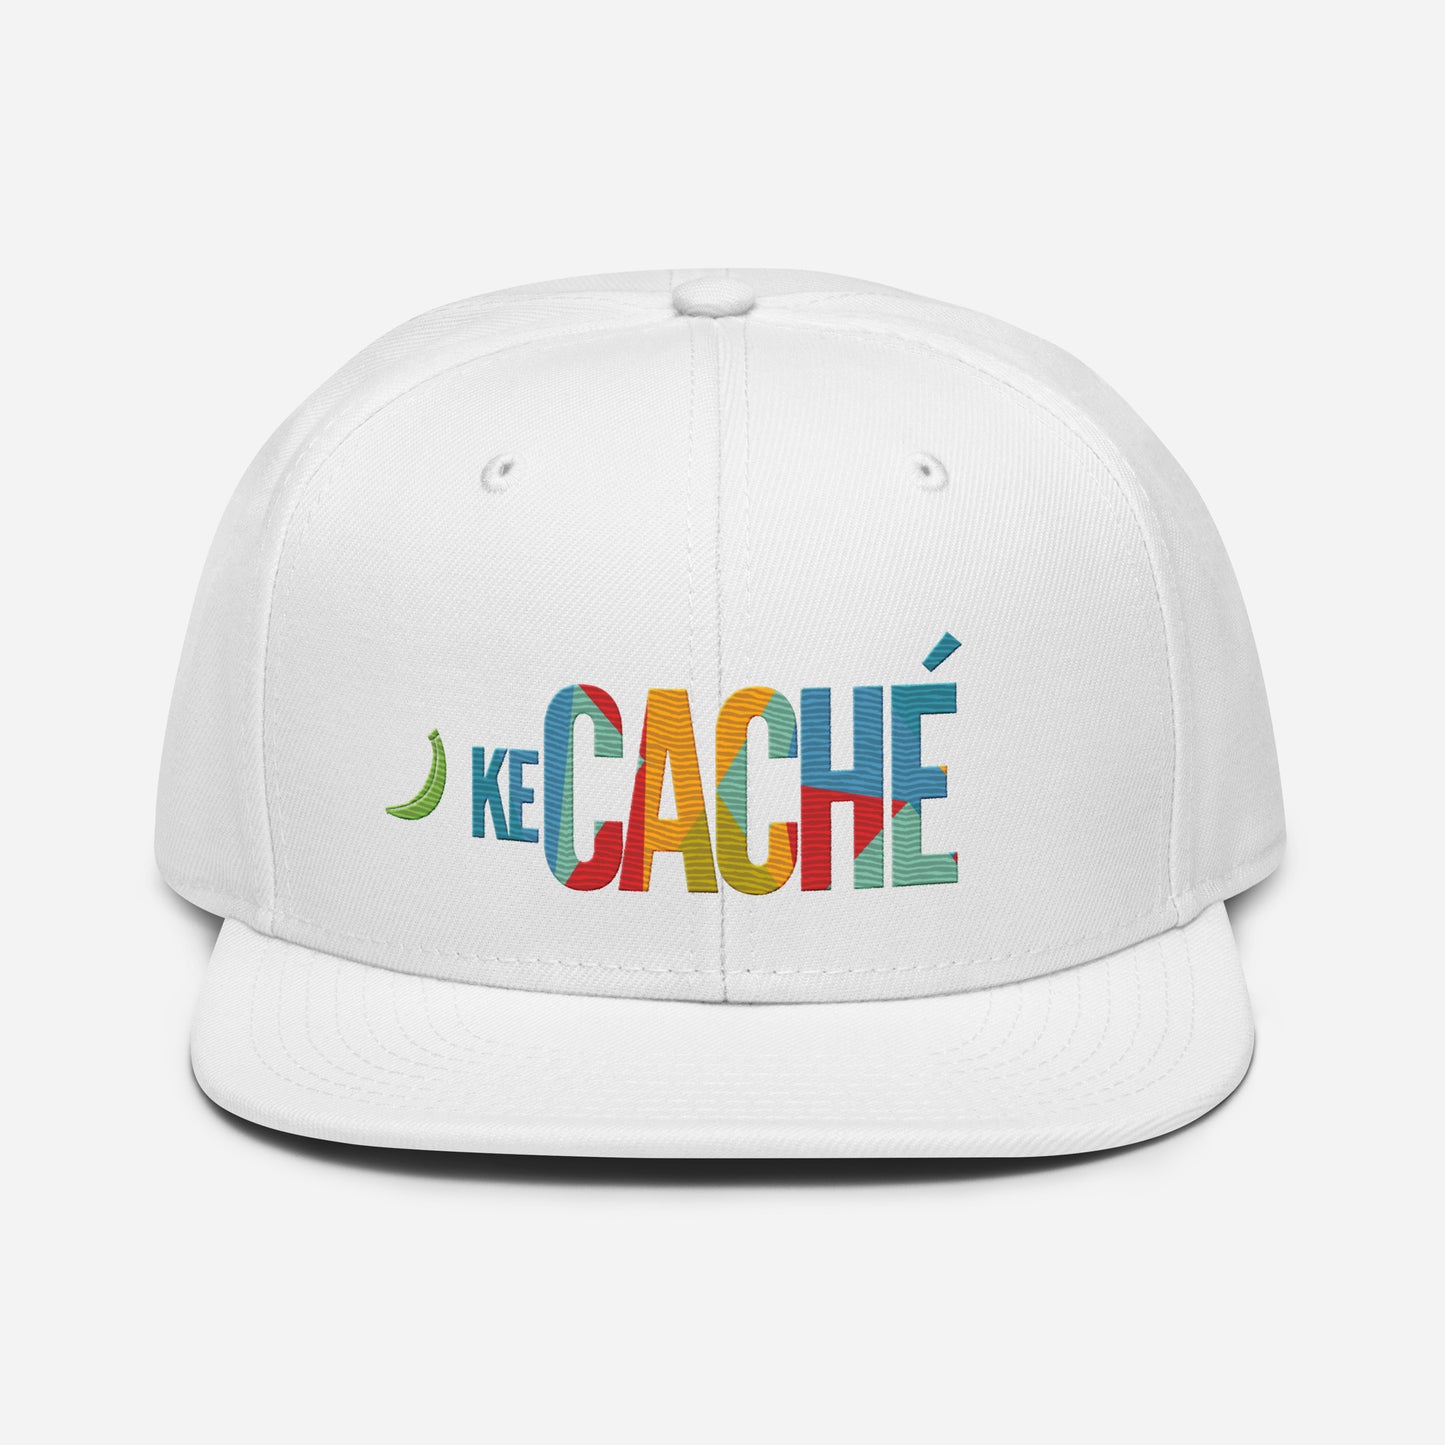  KeCaché Dominican Minimal and Colorful Snapback Hat - All White